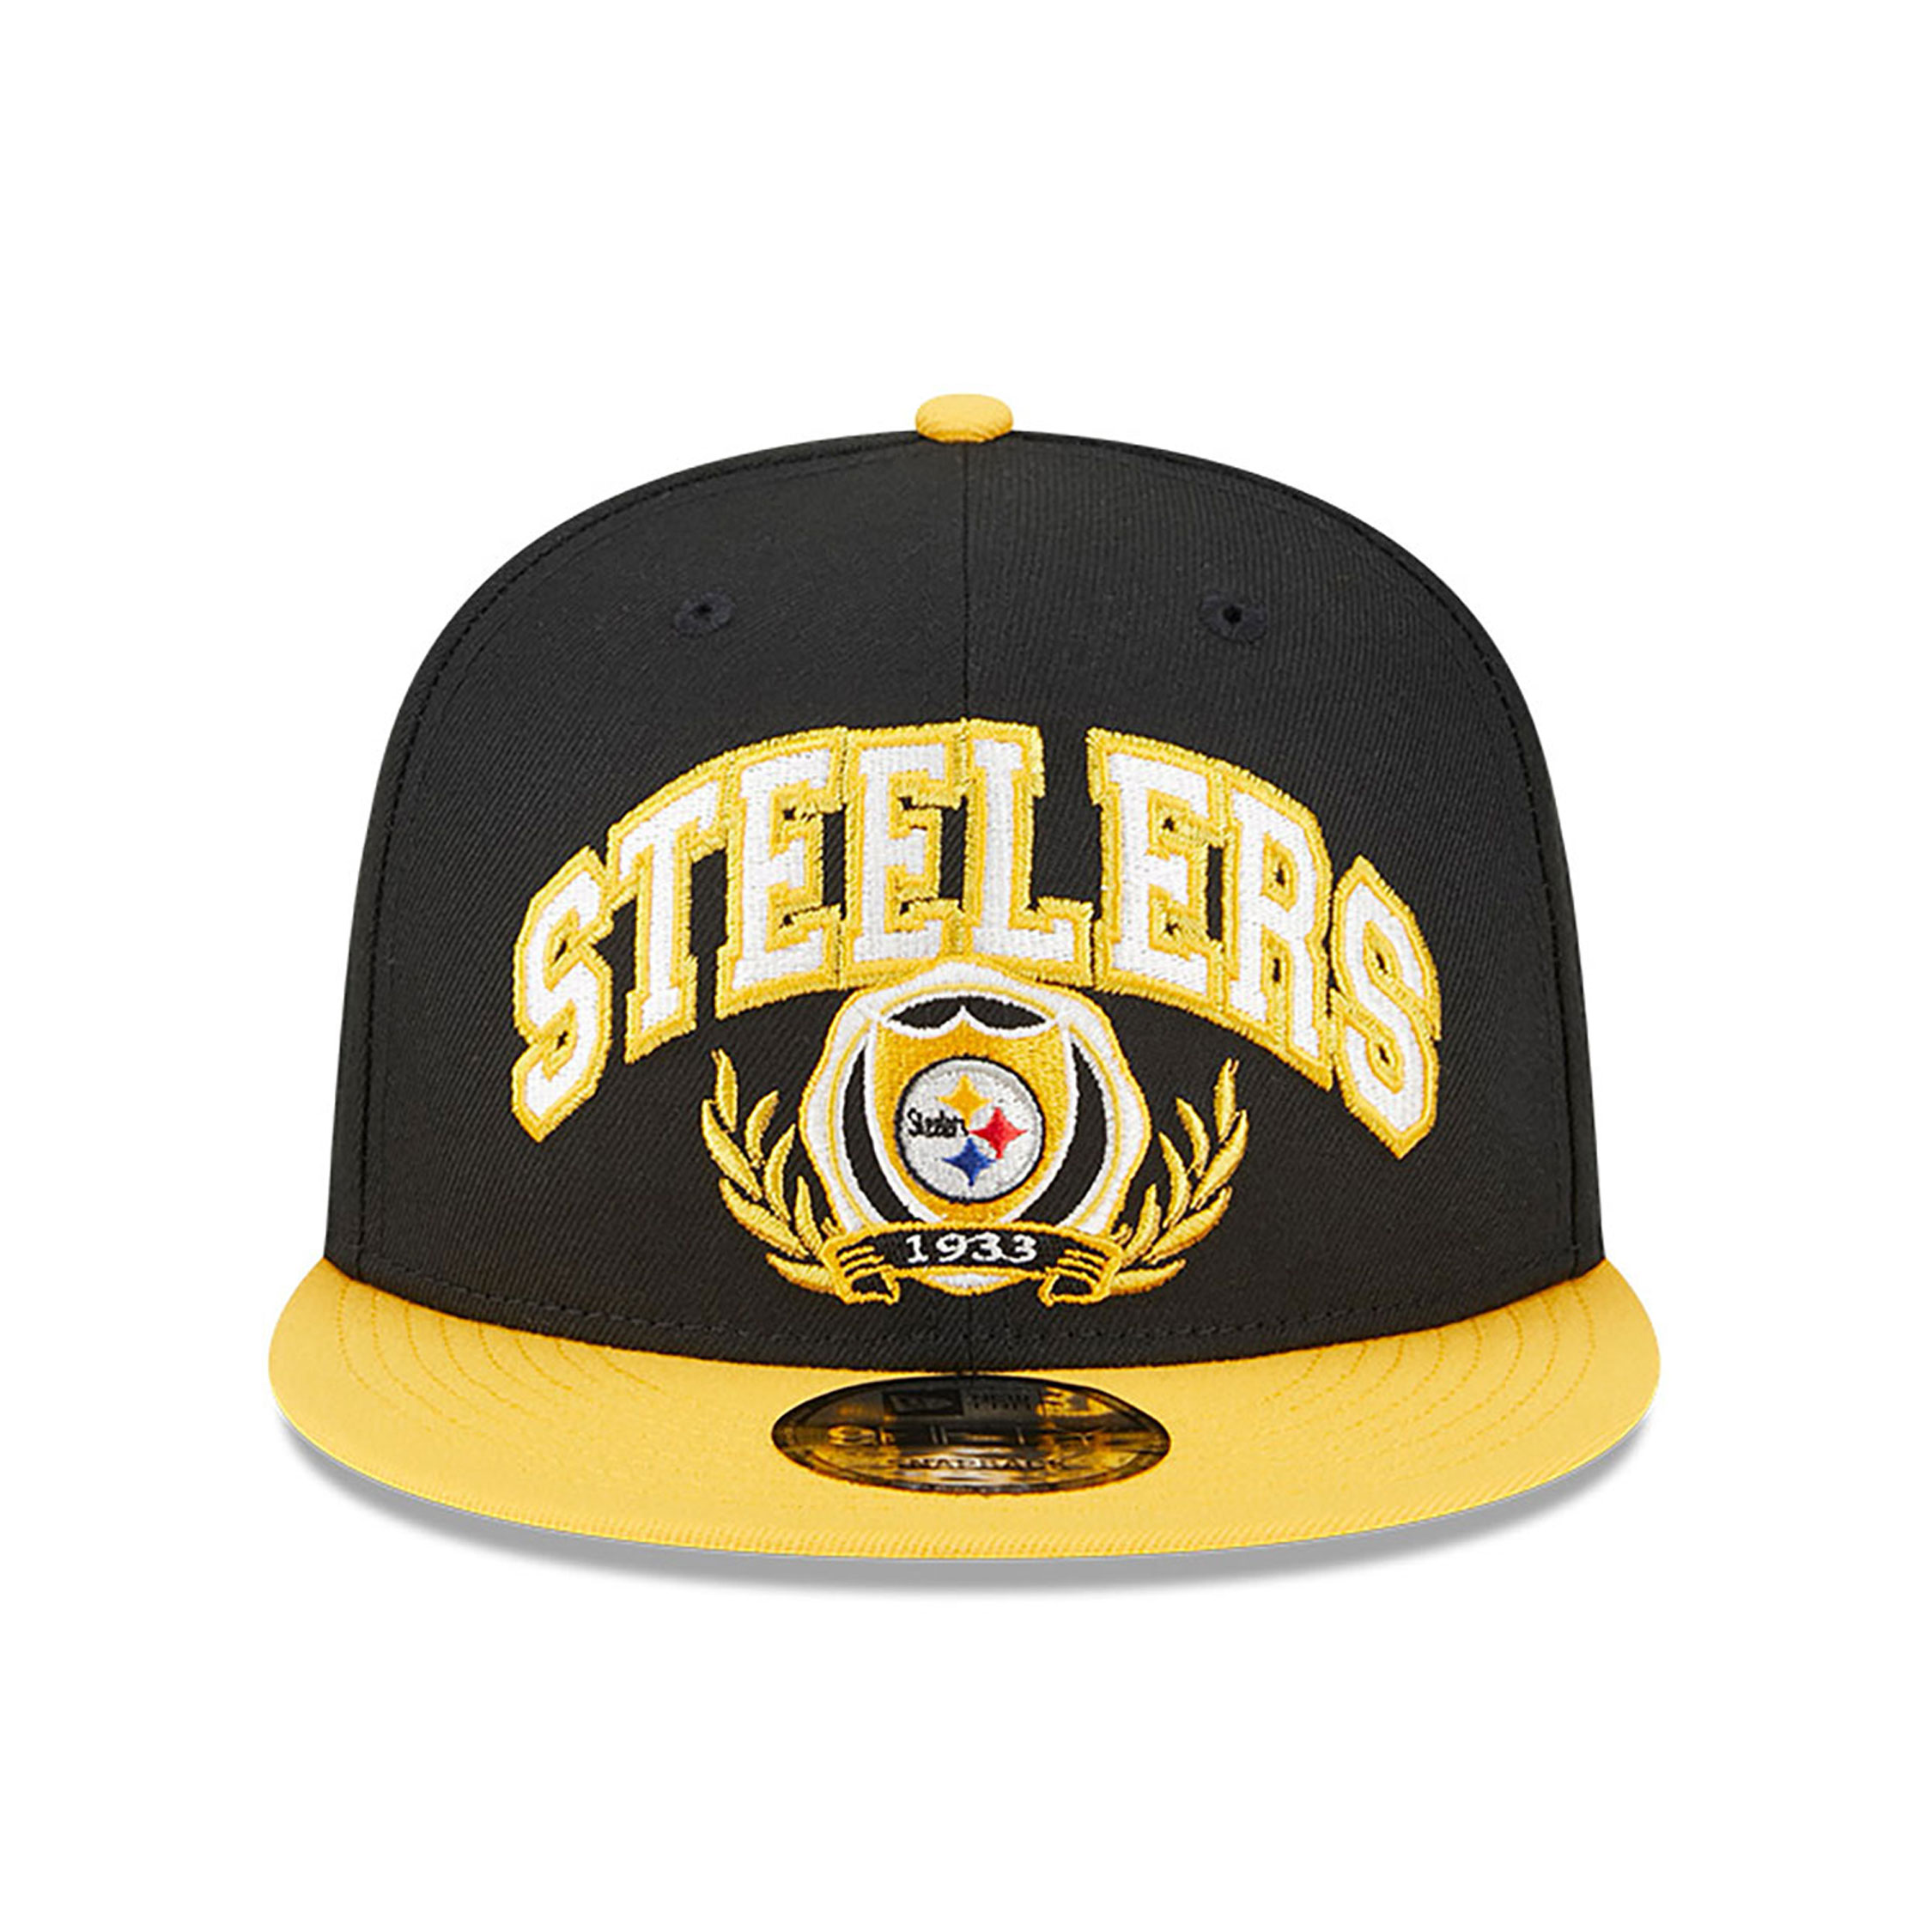 NFL Team Pittsburgh Steelers 9FIFTY Cap D03_951